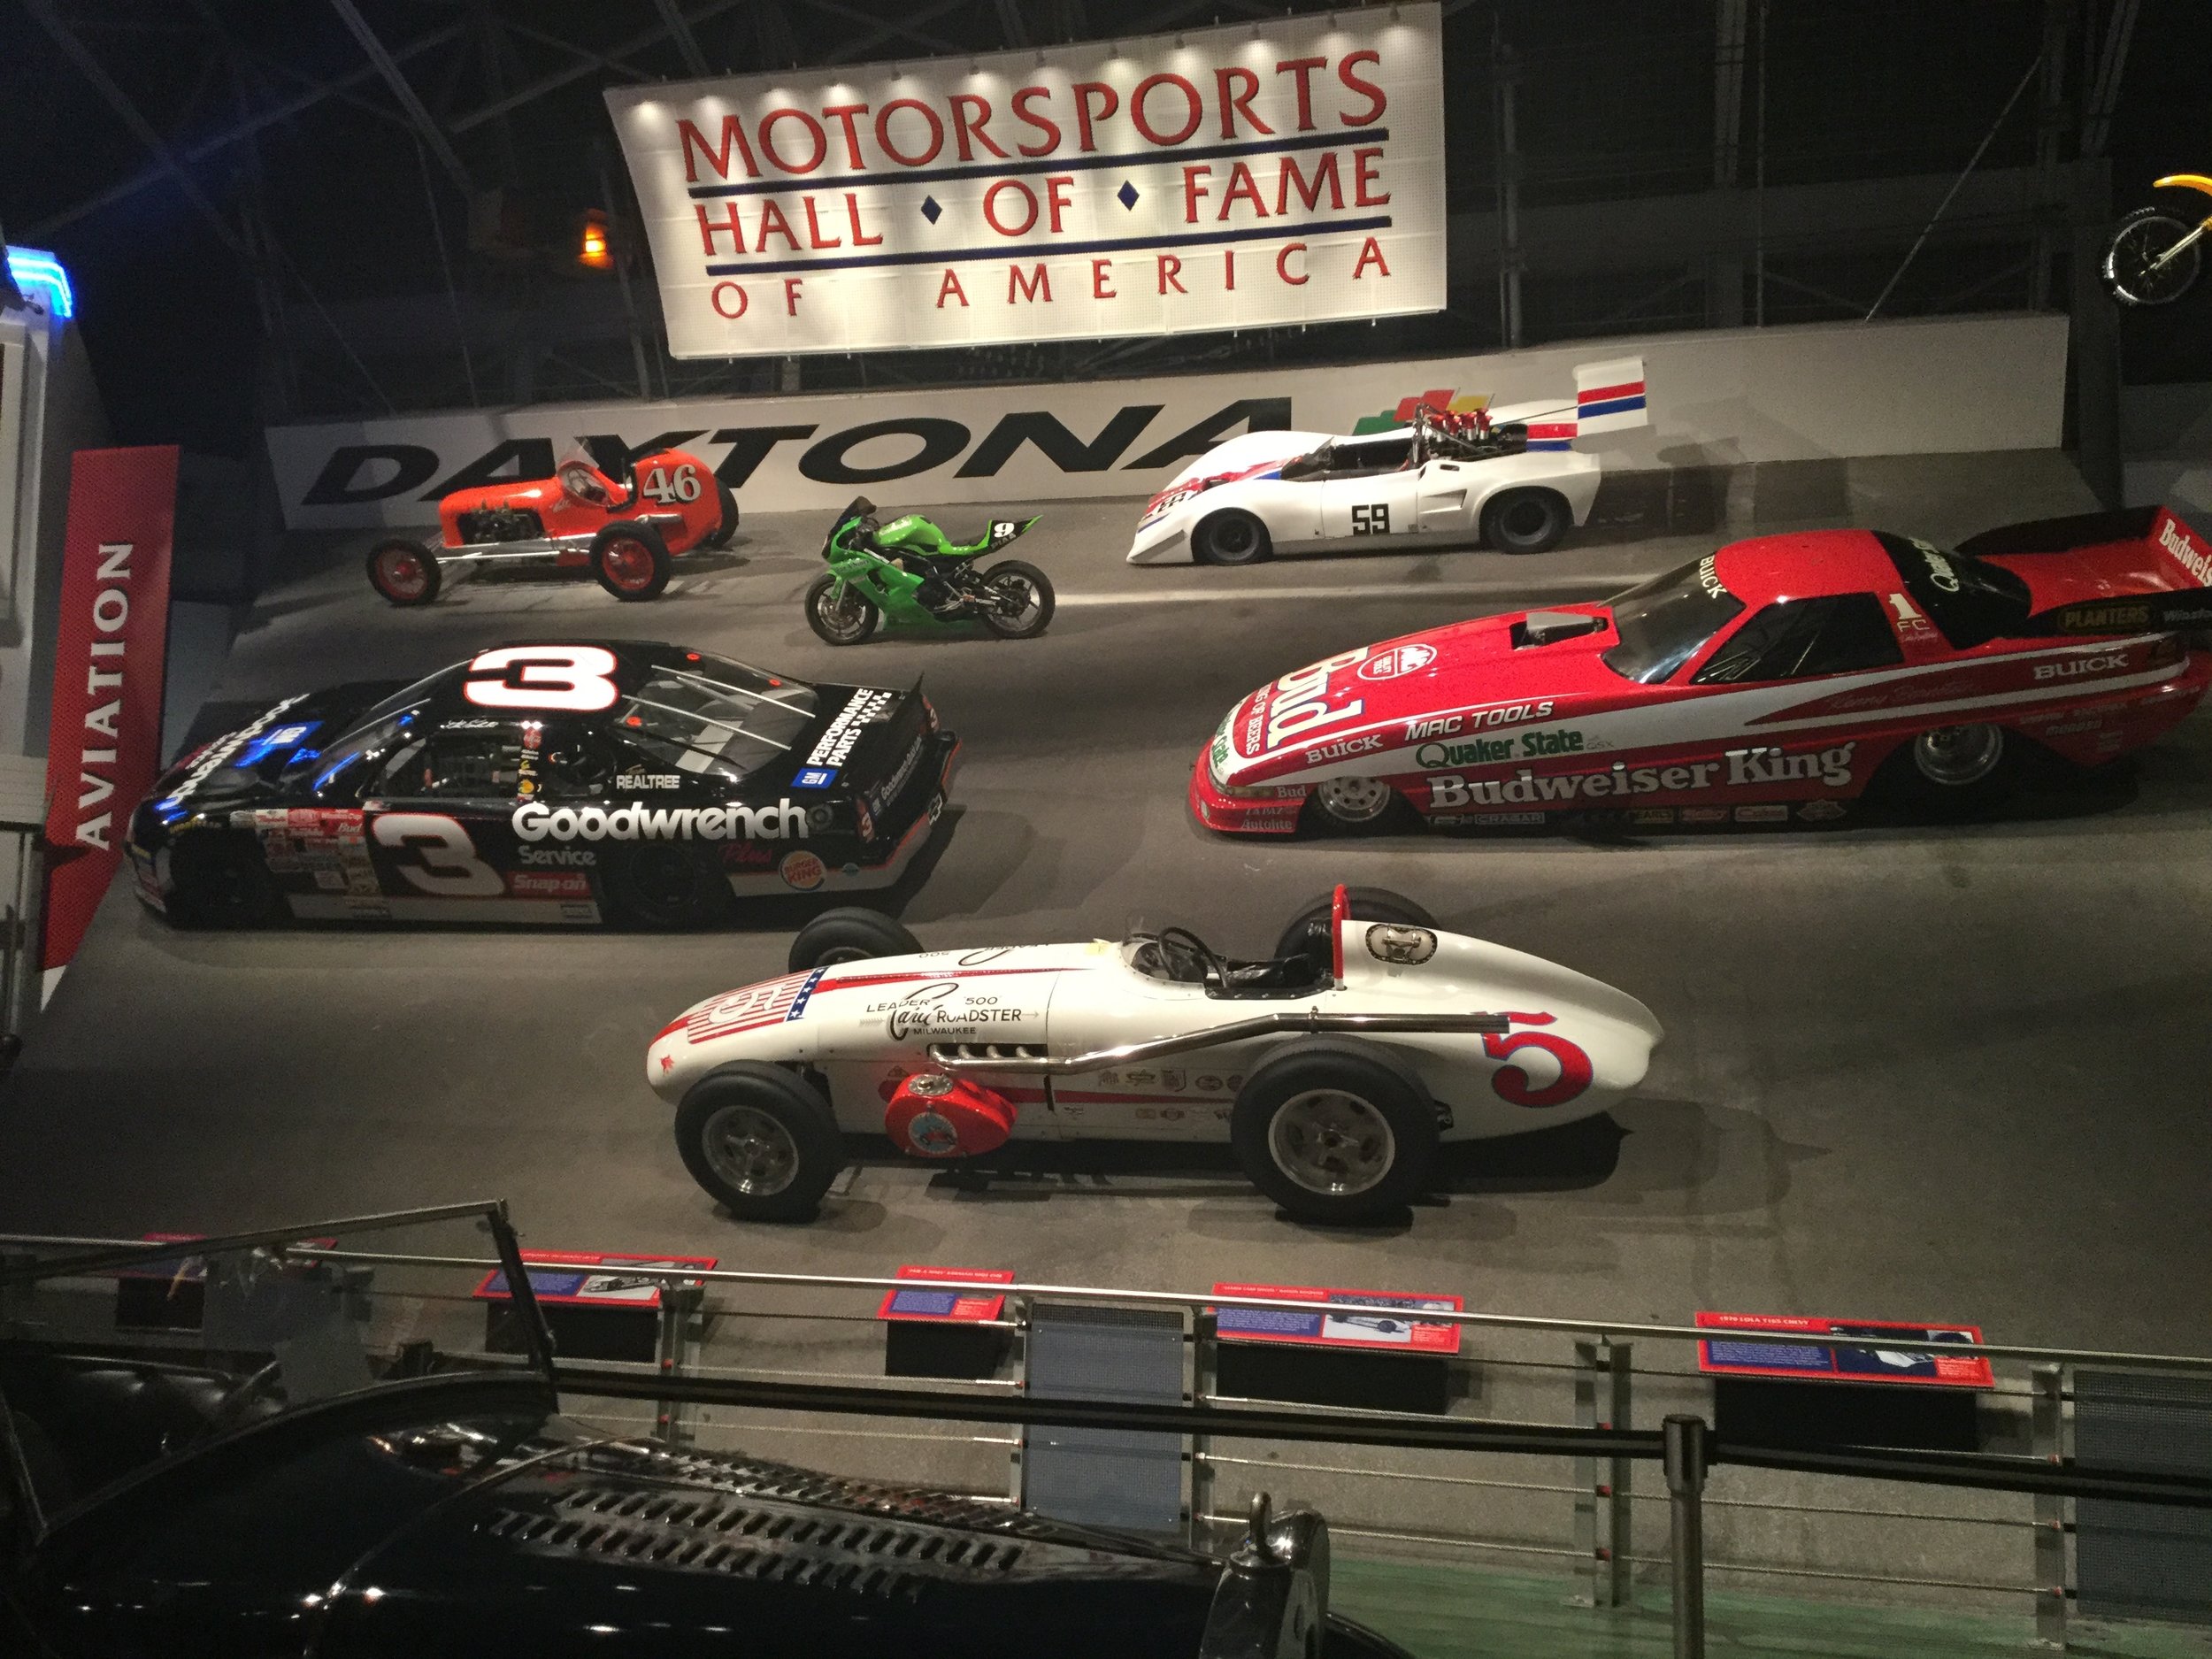  Exhibit at the Motor Sports Hall of Fame of America 